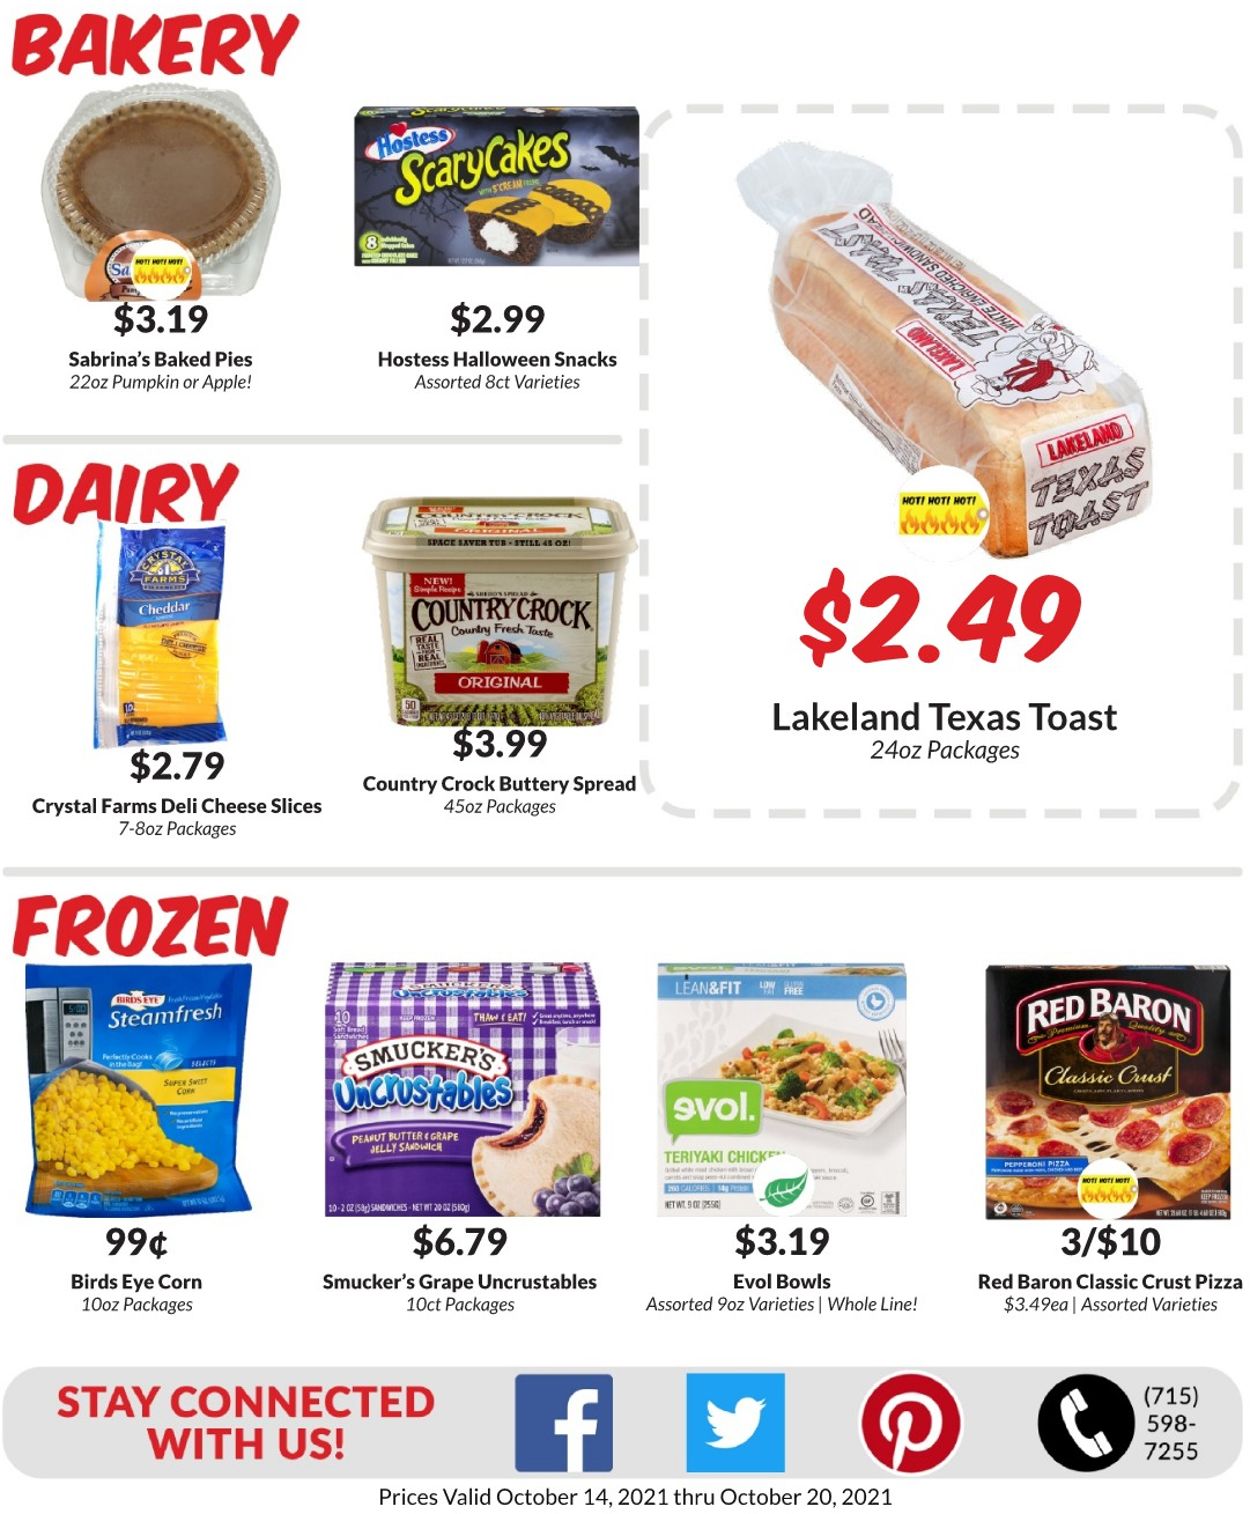 Woodman's Market Ad from 10/14/2021